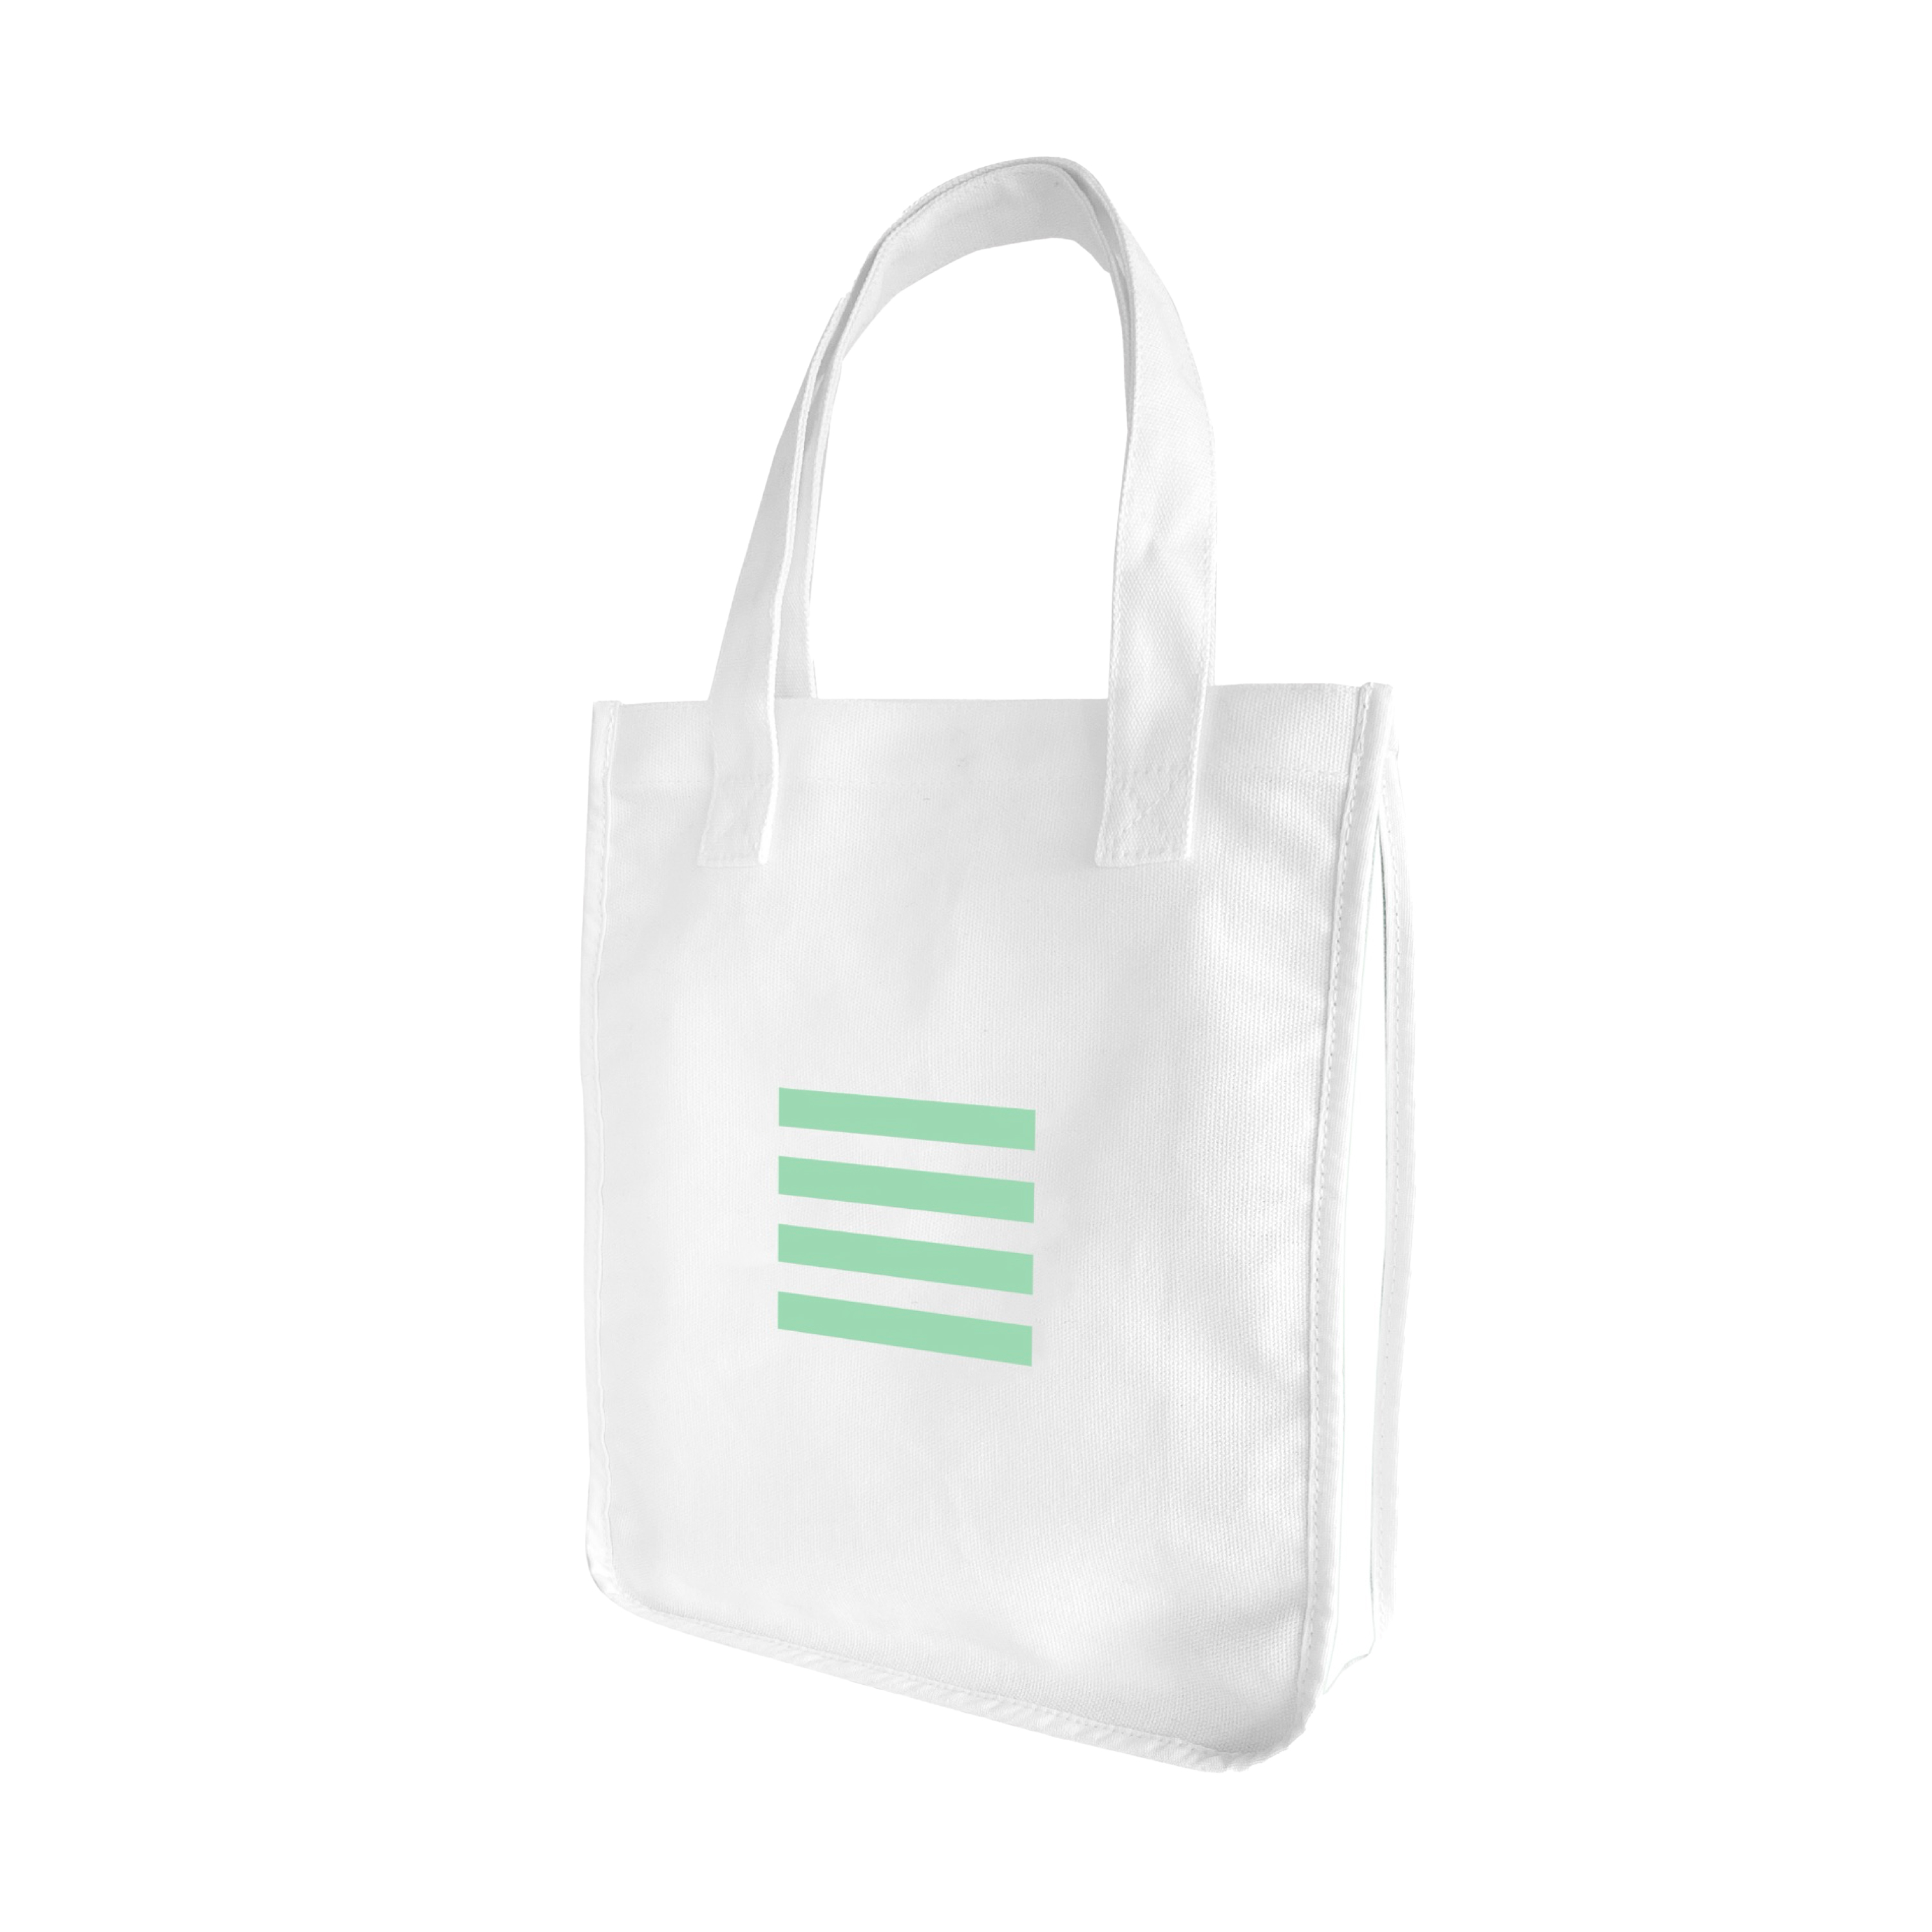 BIOEFFECT Tote Bag | Made From Durable, Recyclable Cotton